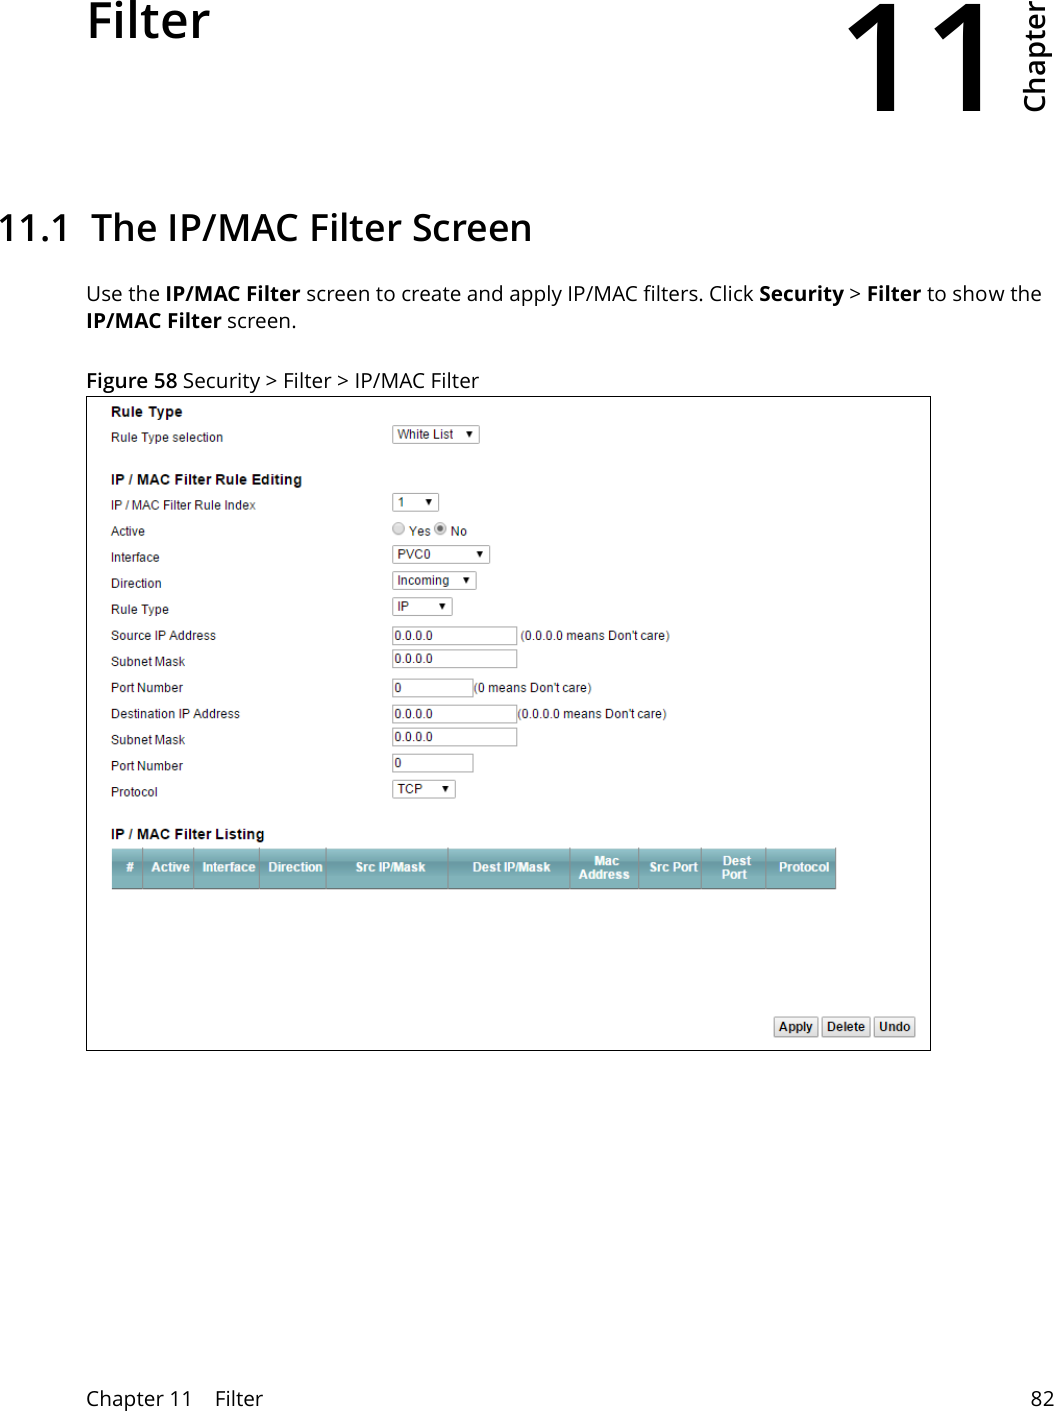 11Chapter Chapter 11    Filter 82CHAPTER 11 Chapter 11 Filter11.1  The IP/MAC Filter ScreenUse the IP/MAC Filter screen to create and apply IP/MAC filters. Click Security &gt; Filter to show the IP/MAC Filter screen.Figure 58 Security &gt; Filter &gt; IP/MAC Filter 